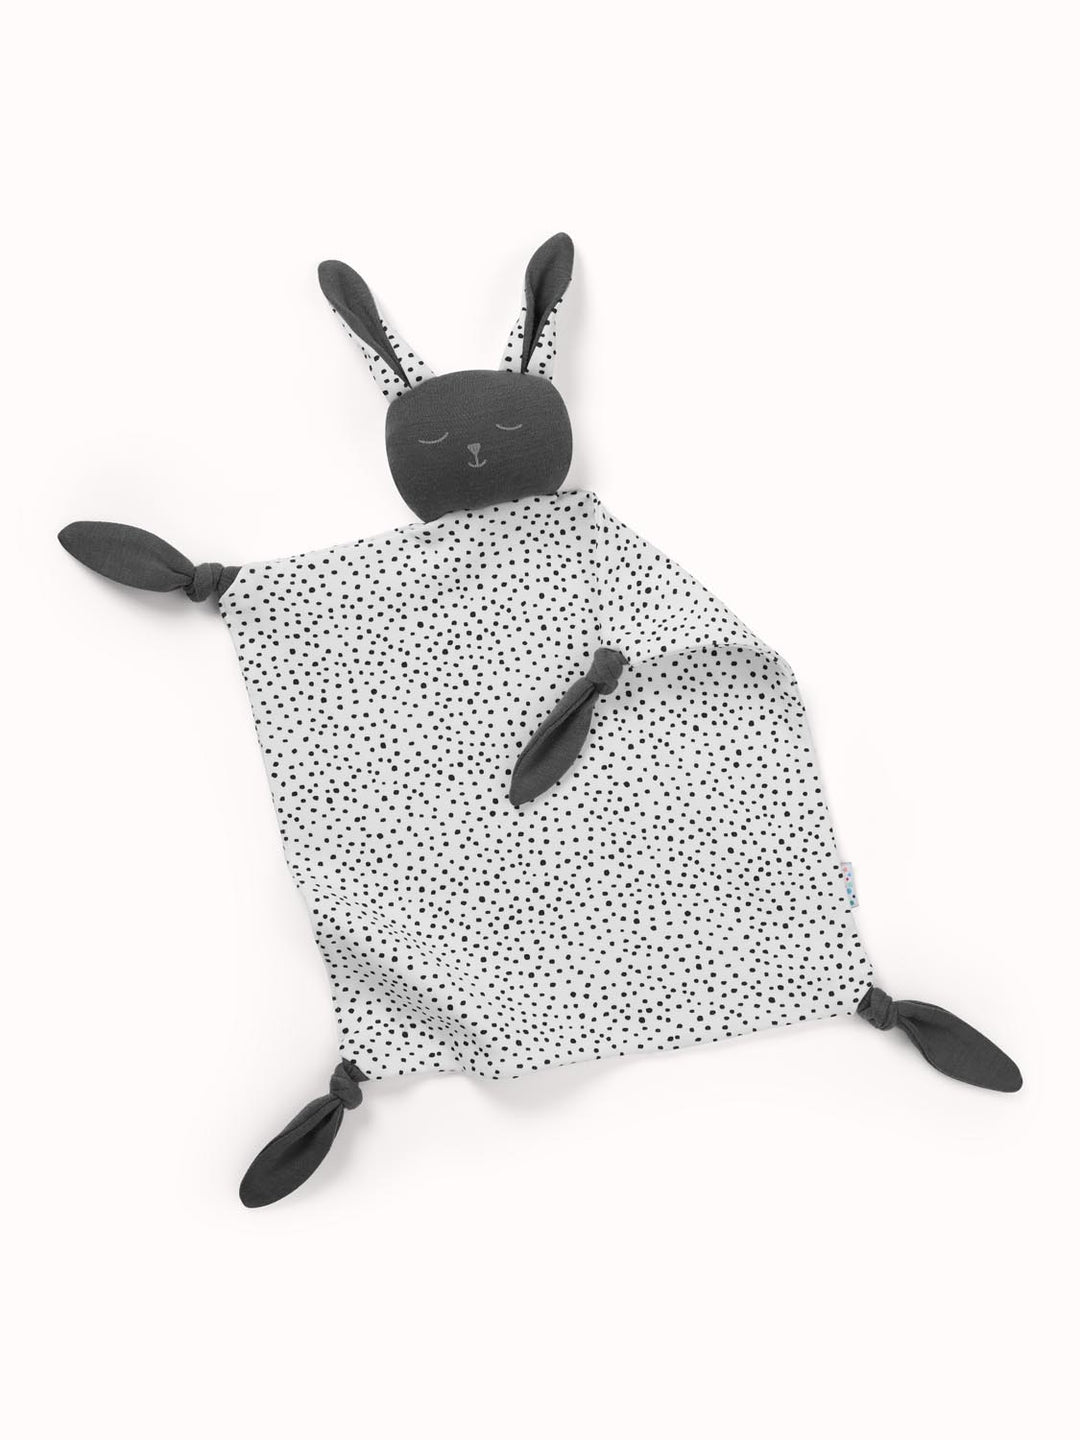 Imperfect Cuddle Bunny Comforter Imperfect Superlove Outlet Speckle